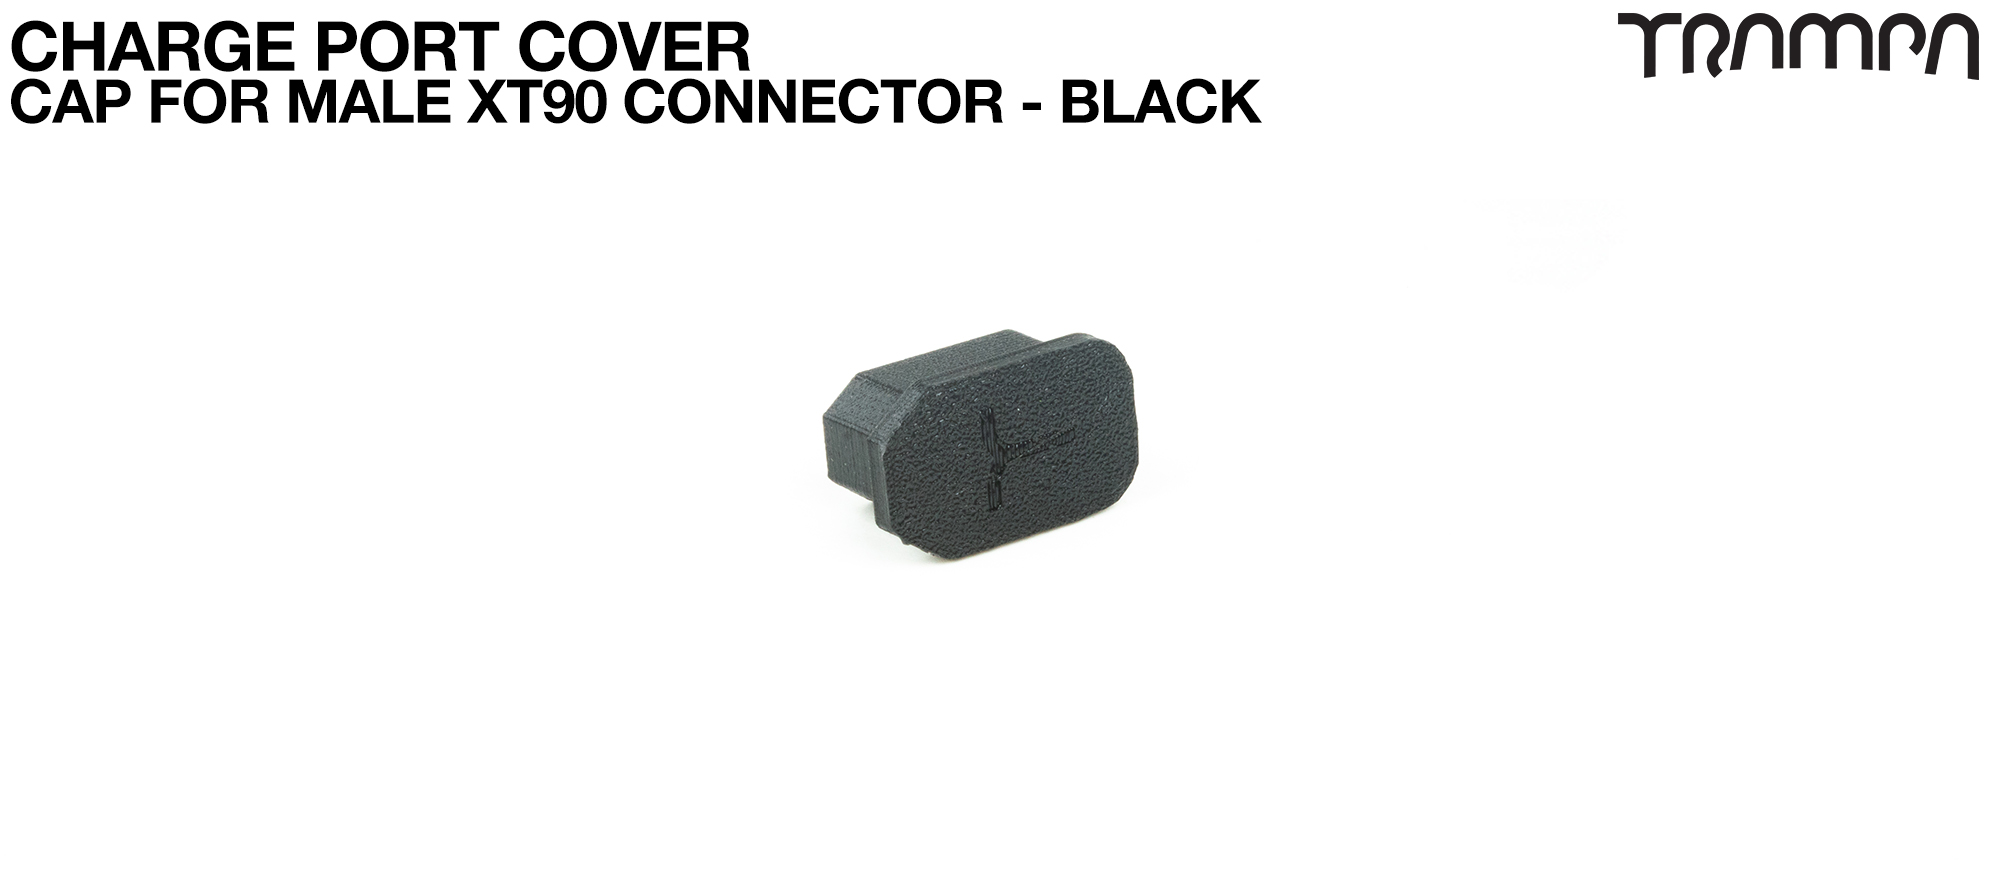 Charge Port Cover - CAP for Male XT90 Connector BLACK